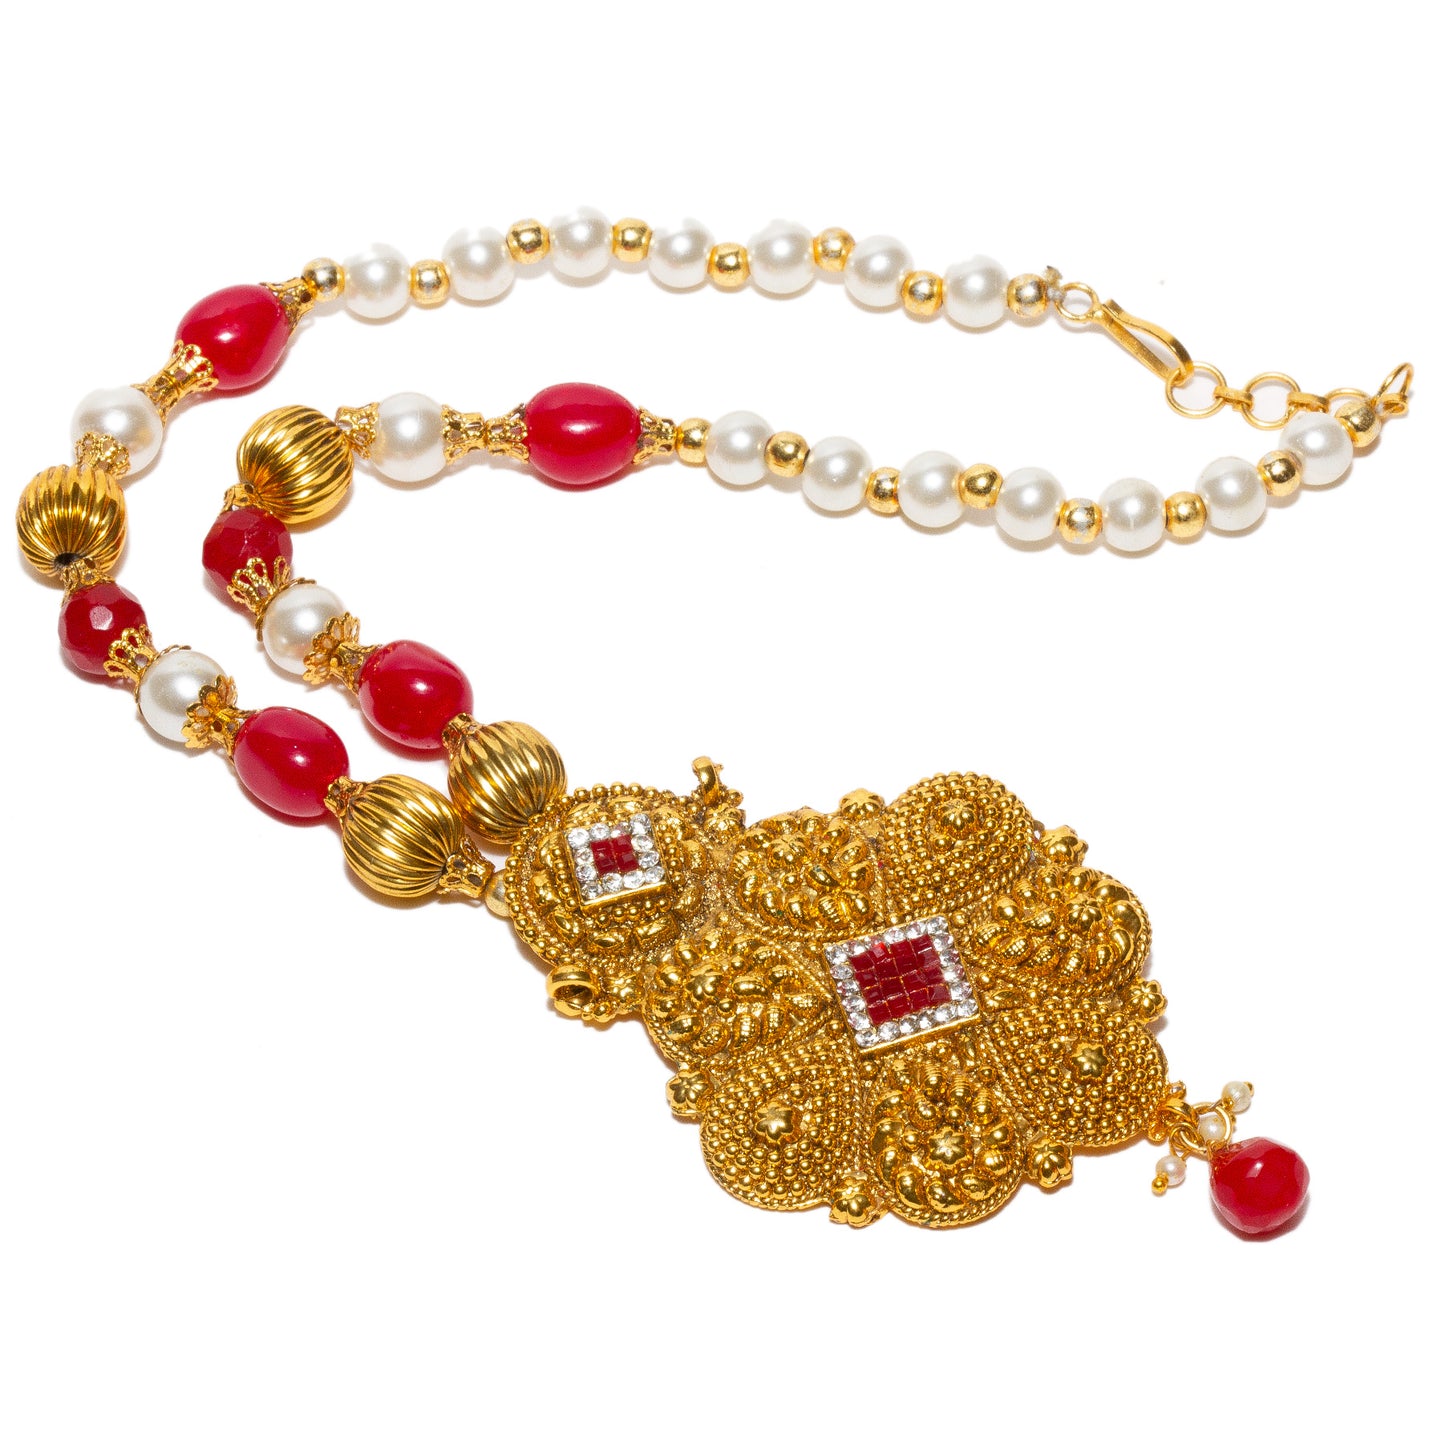 bindhani-gold-plated-white-ruby-pink-golden-color-pearl-mala-flower-necklace-earring-for-women-girls